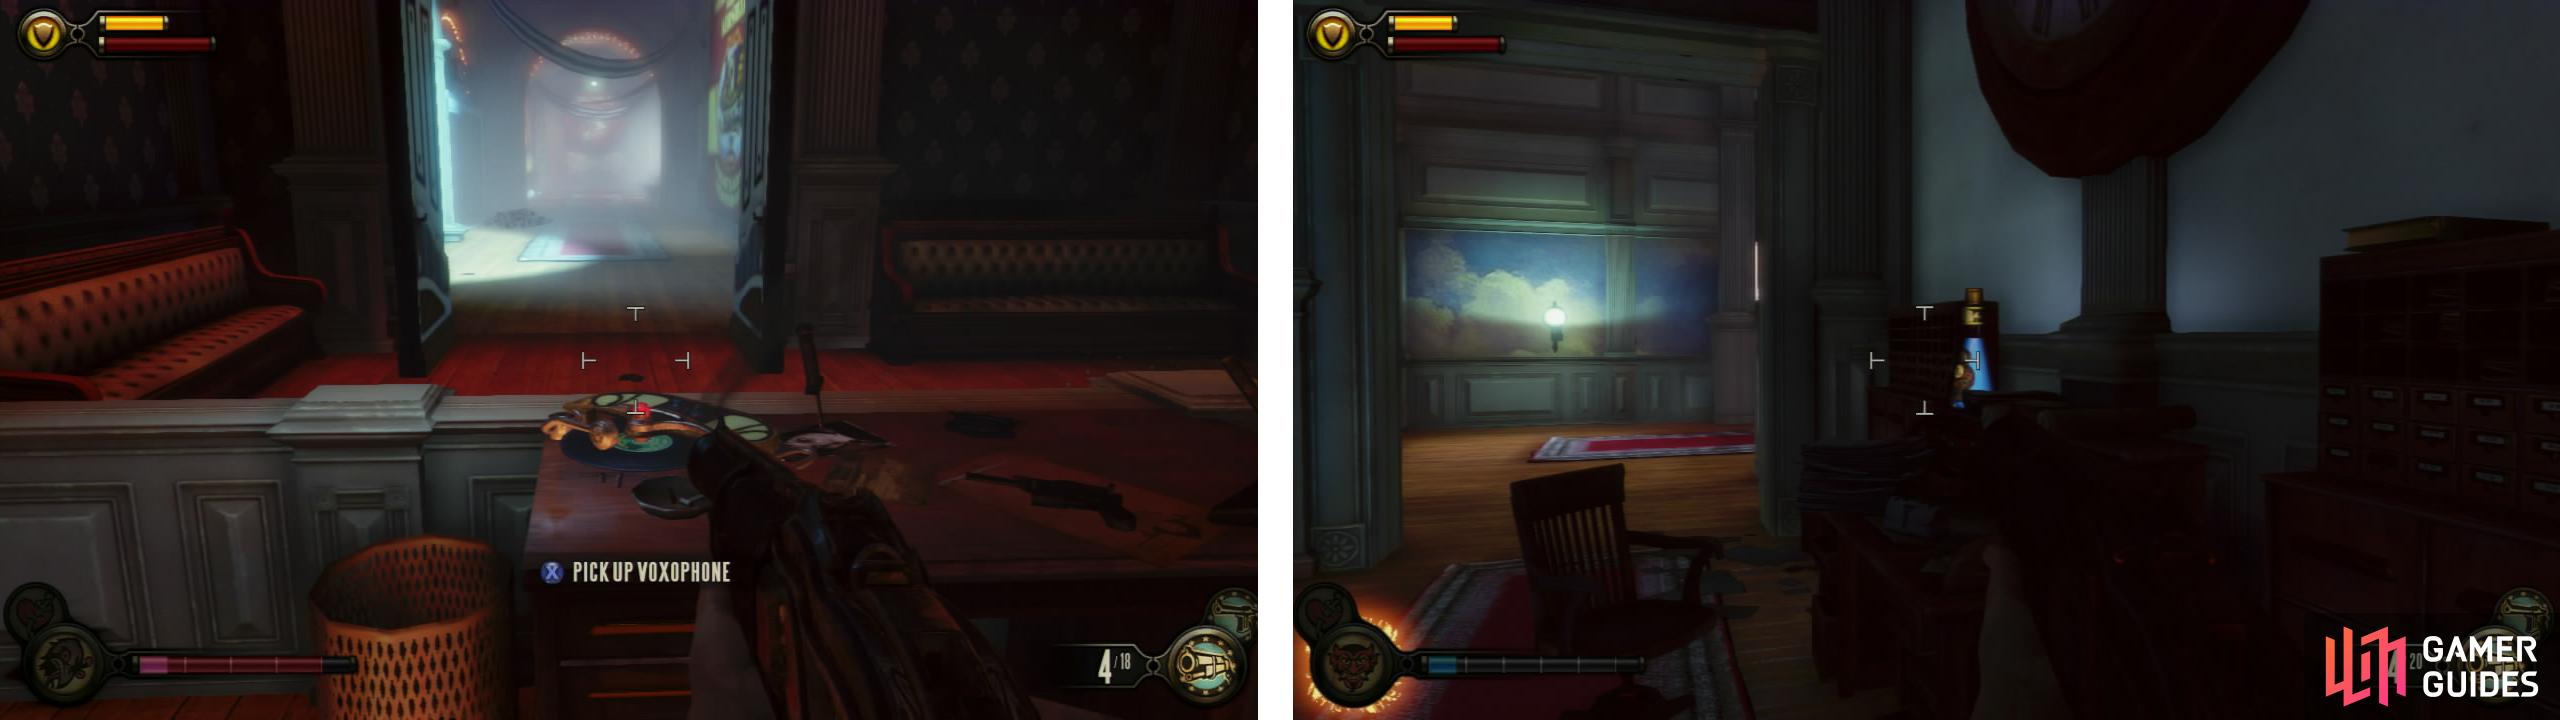 After the ambush, check out the room at top of the stairs for a Voxophone (left) and enter the ticket office for an Infusion Upgrade (right).